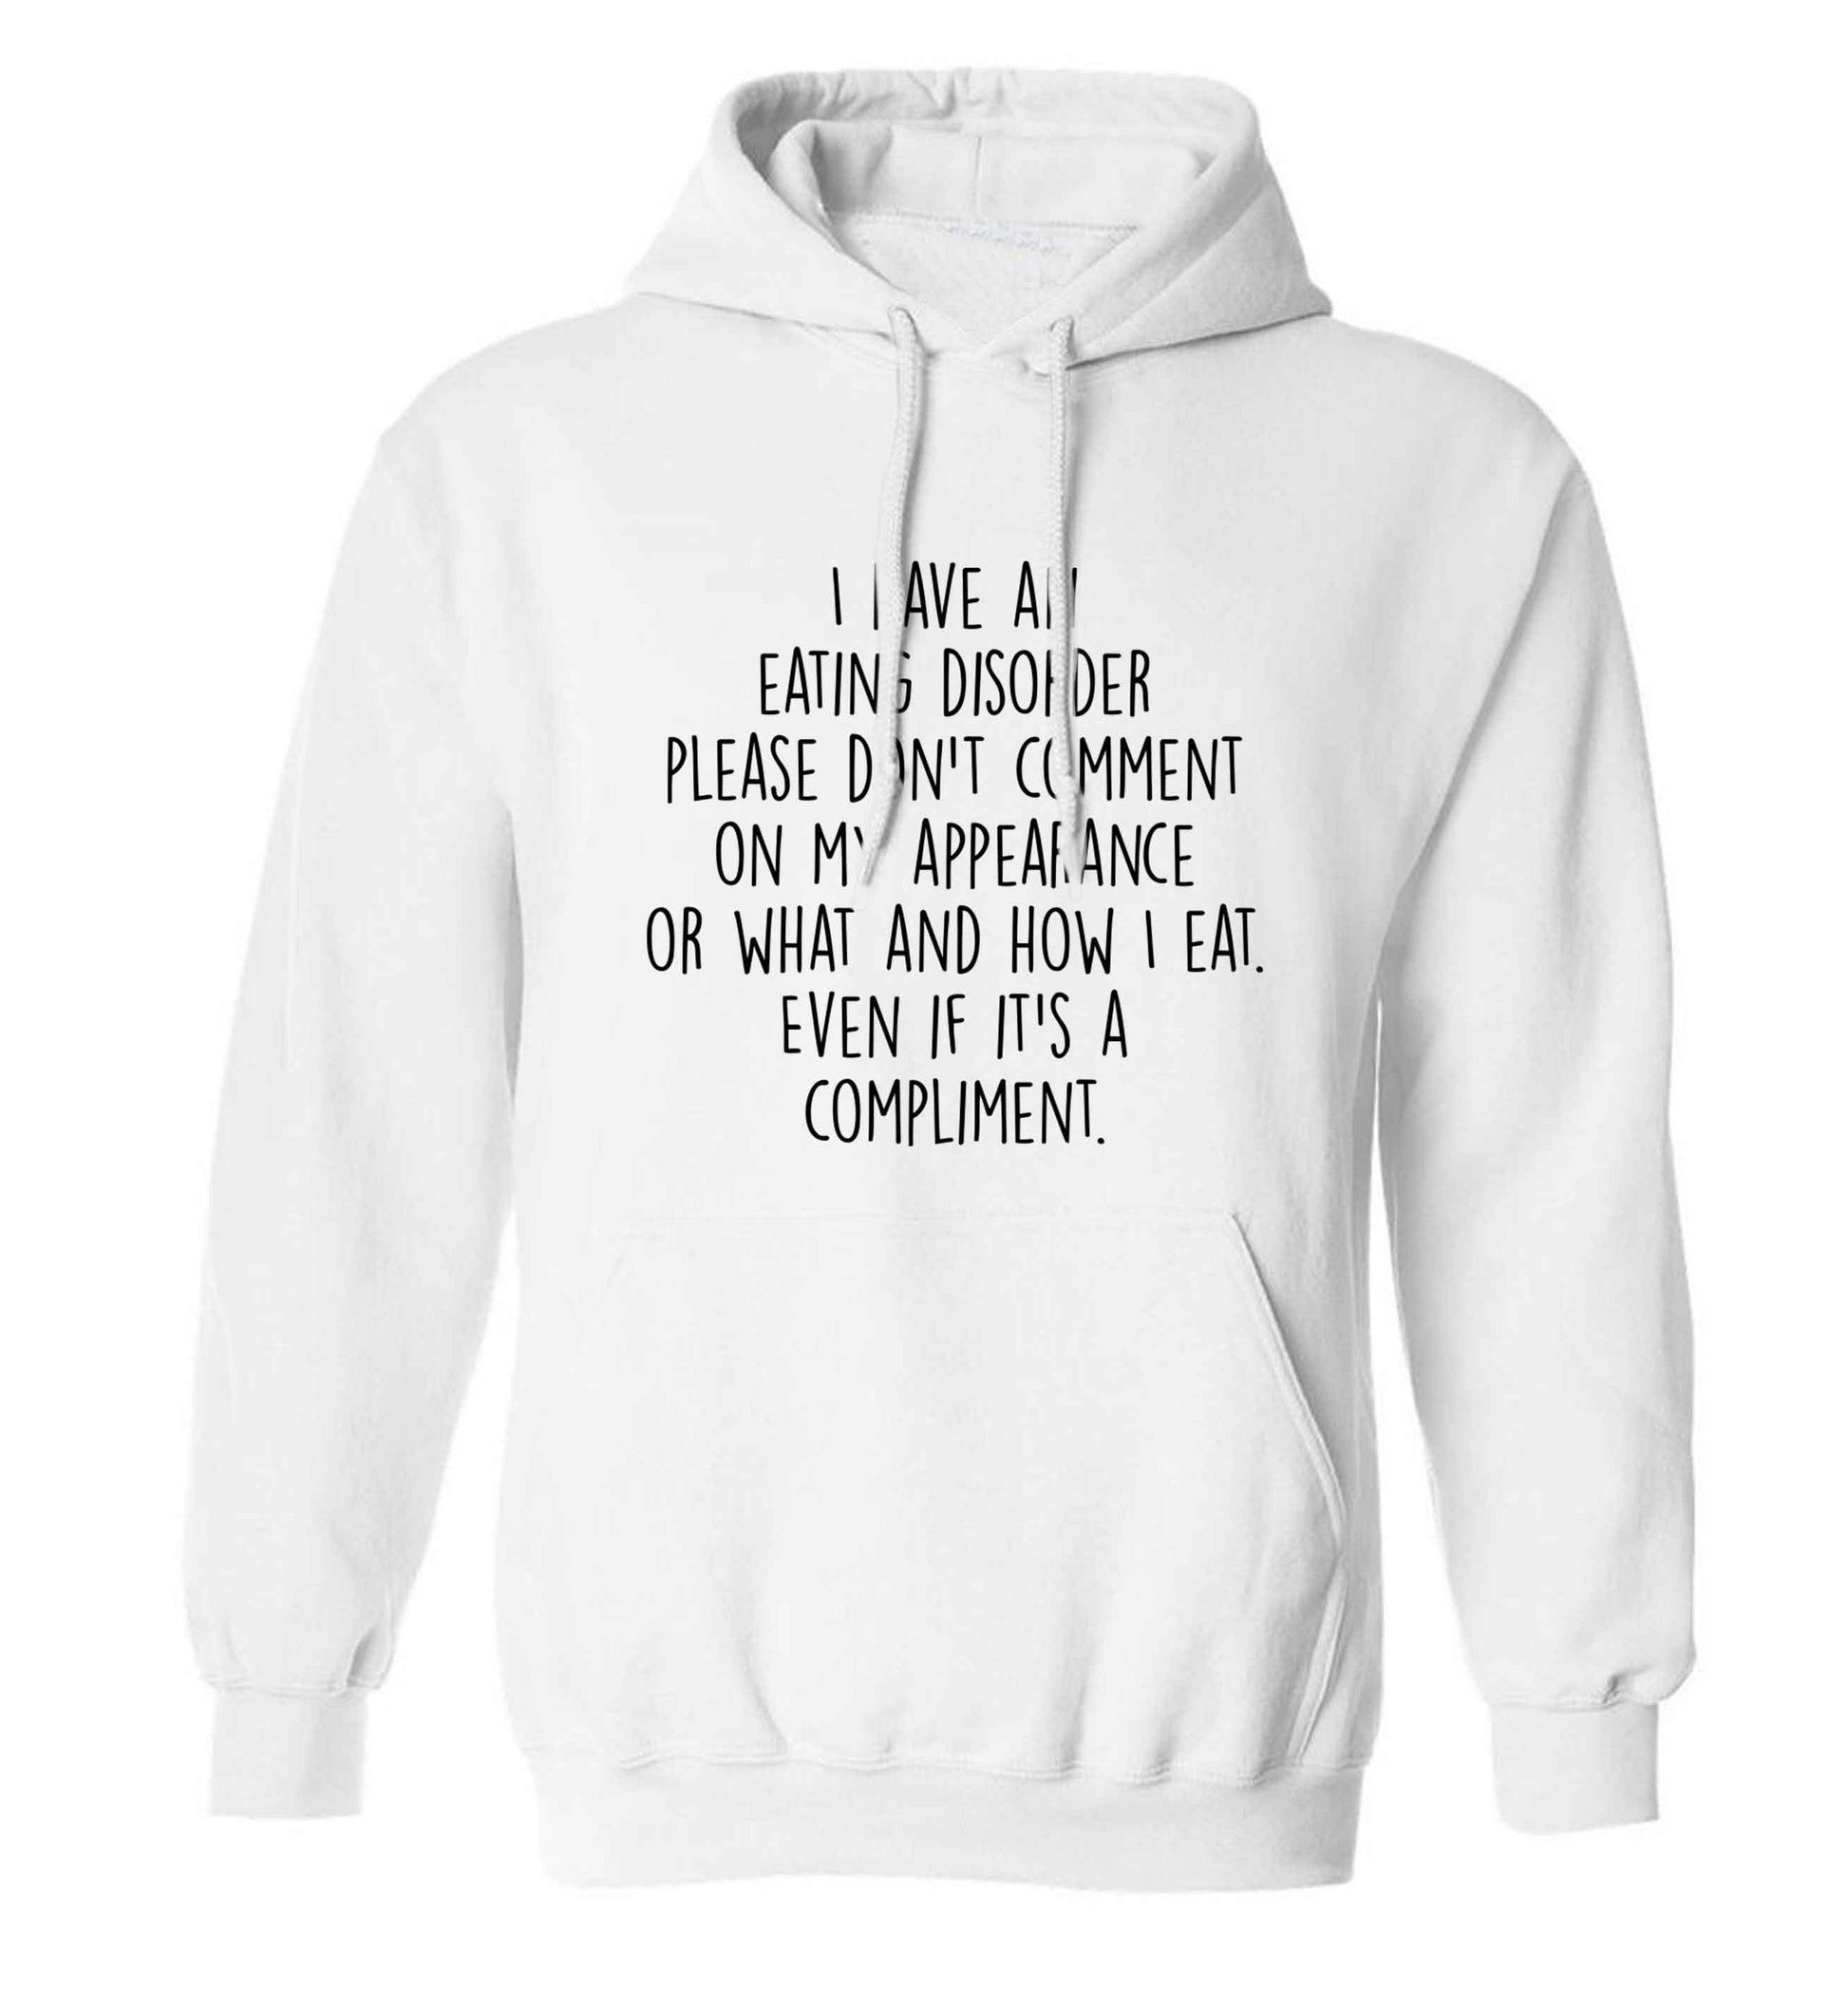 I have an eating disorder please don't comment on my appearance or what and how I eat. Even if it's a compliment adults unisex white hoodie 2XL